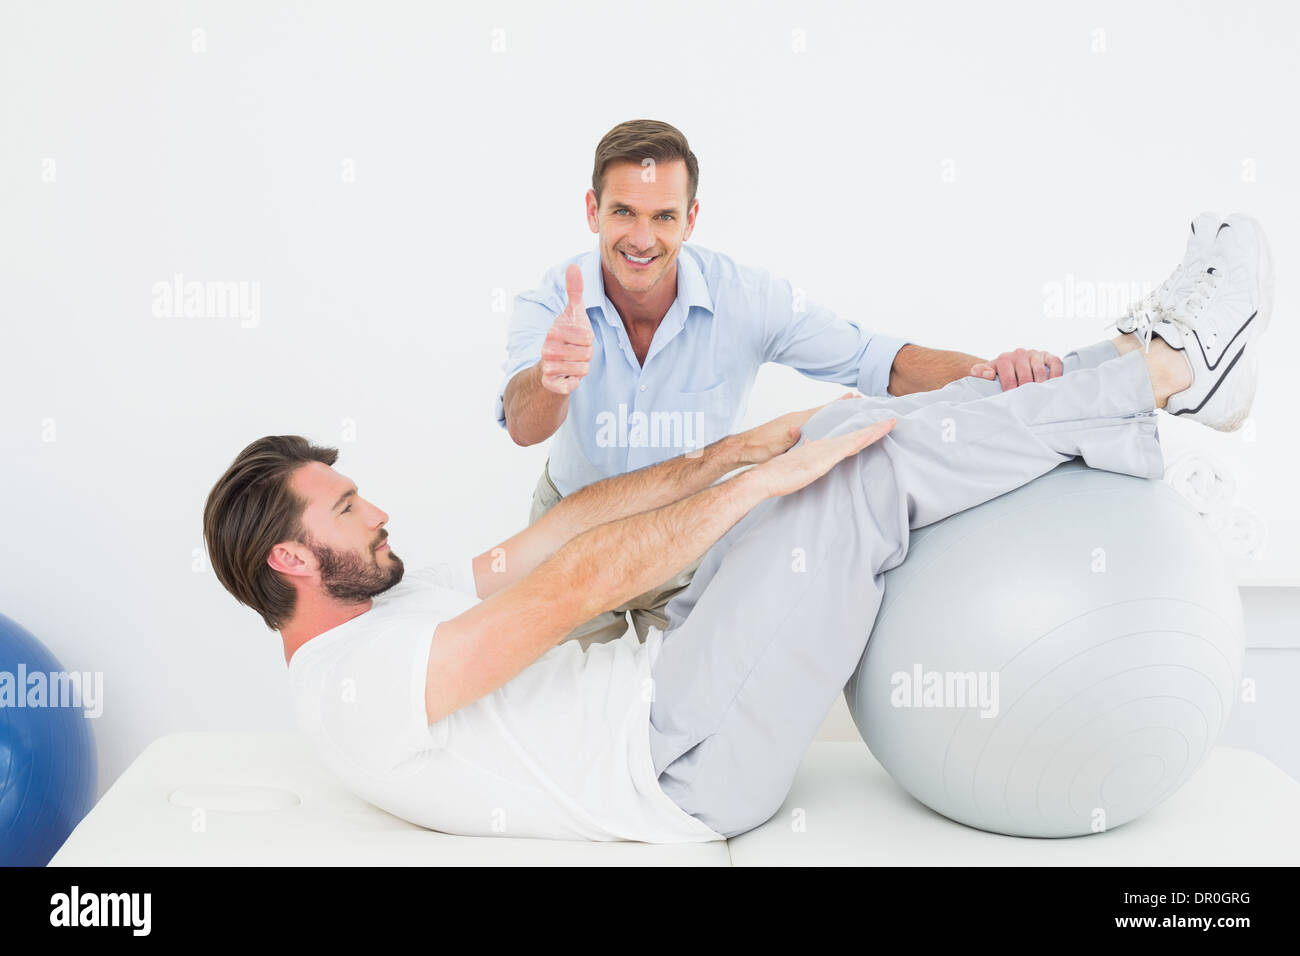 Therapist gestures thumbs up while assisting man do sit ups Stock Photo